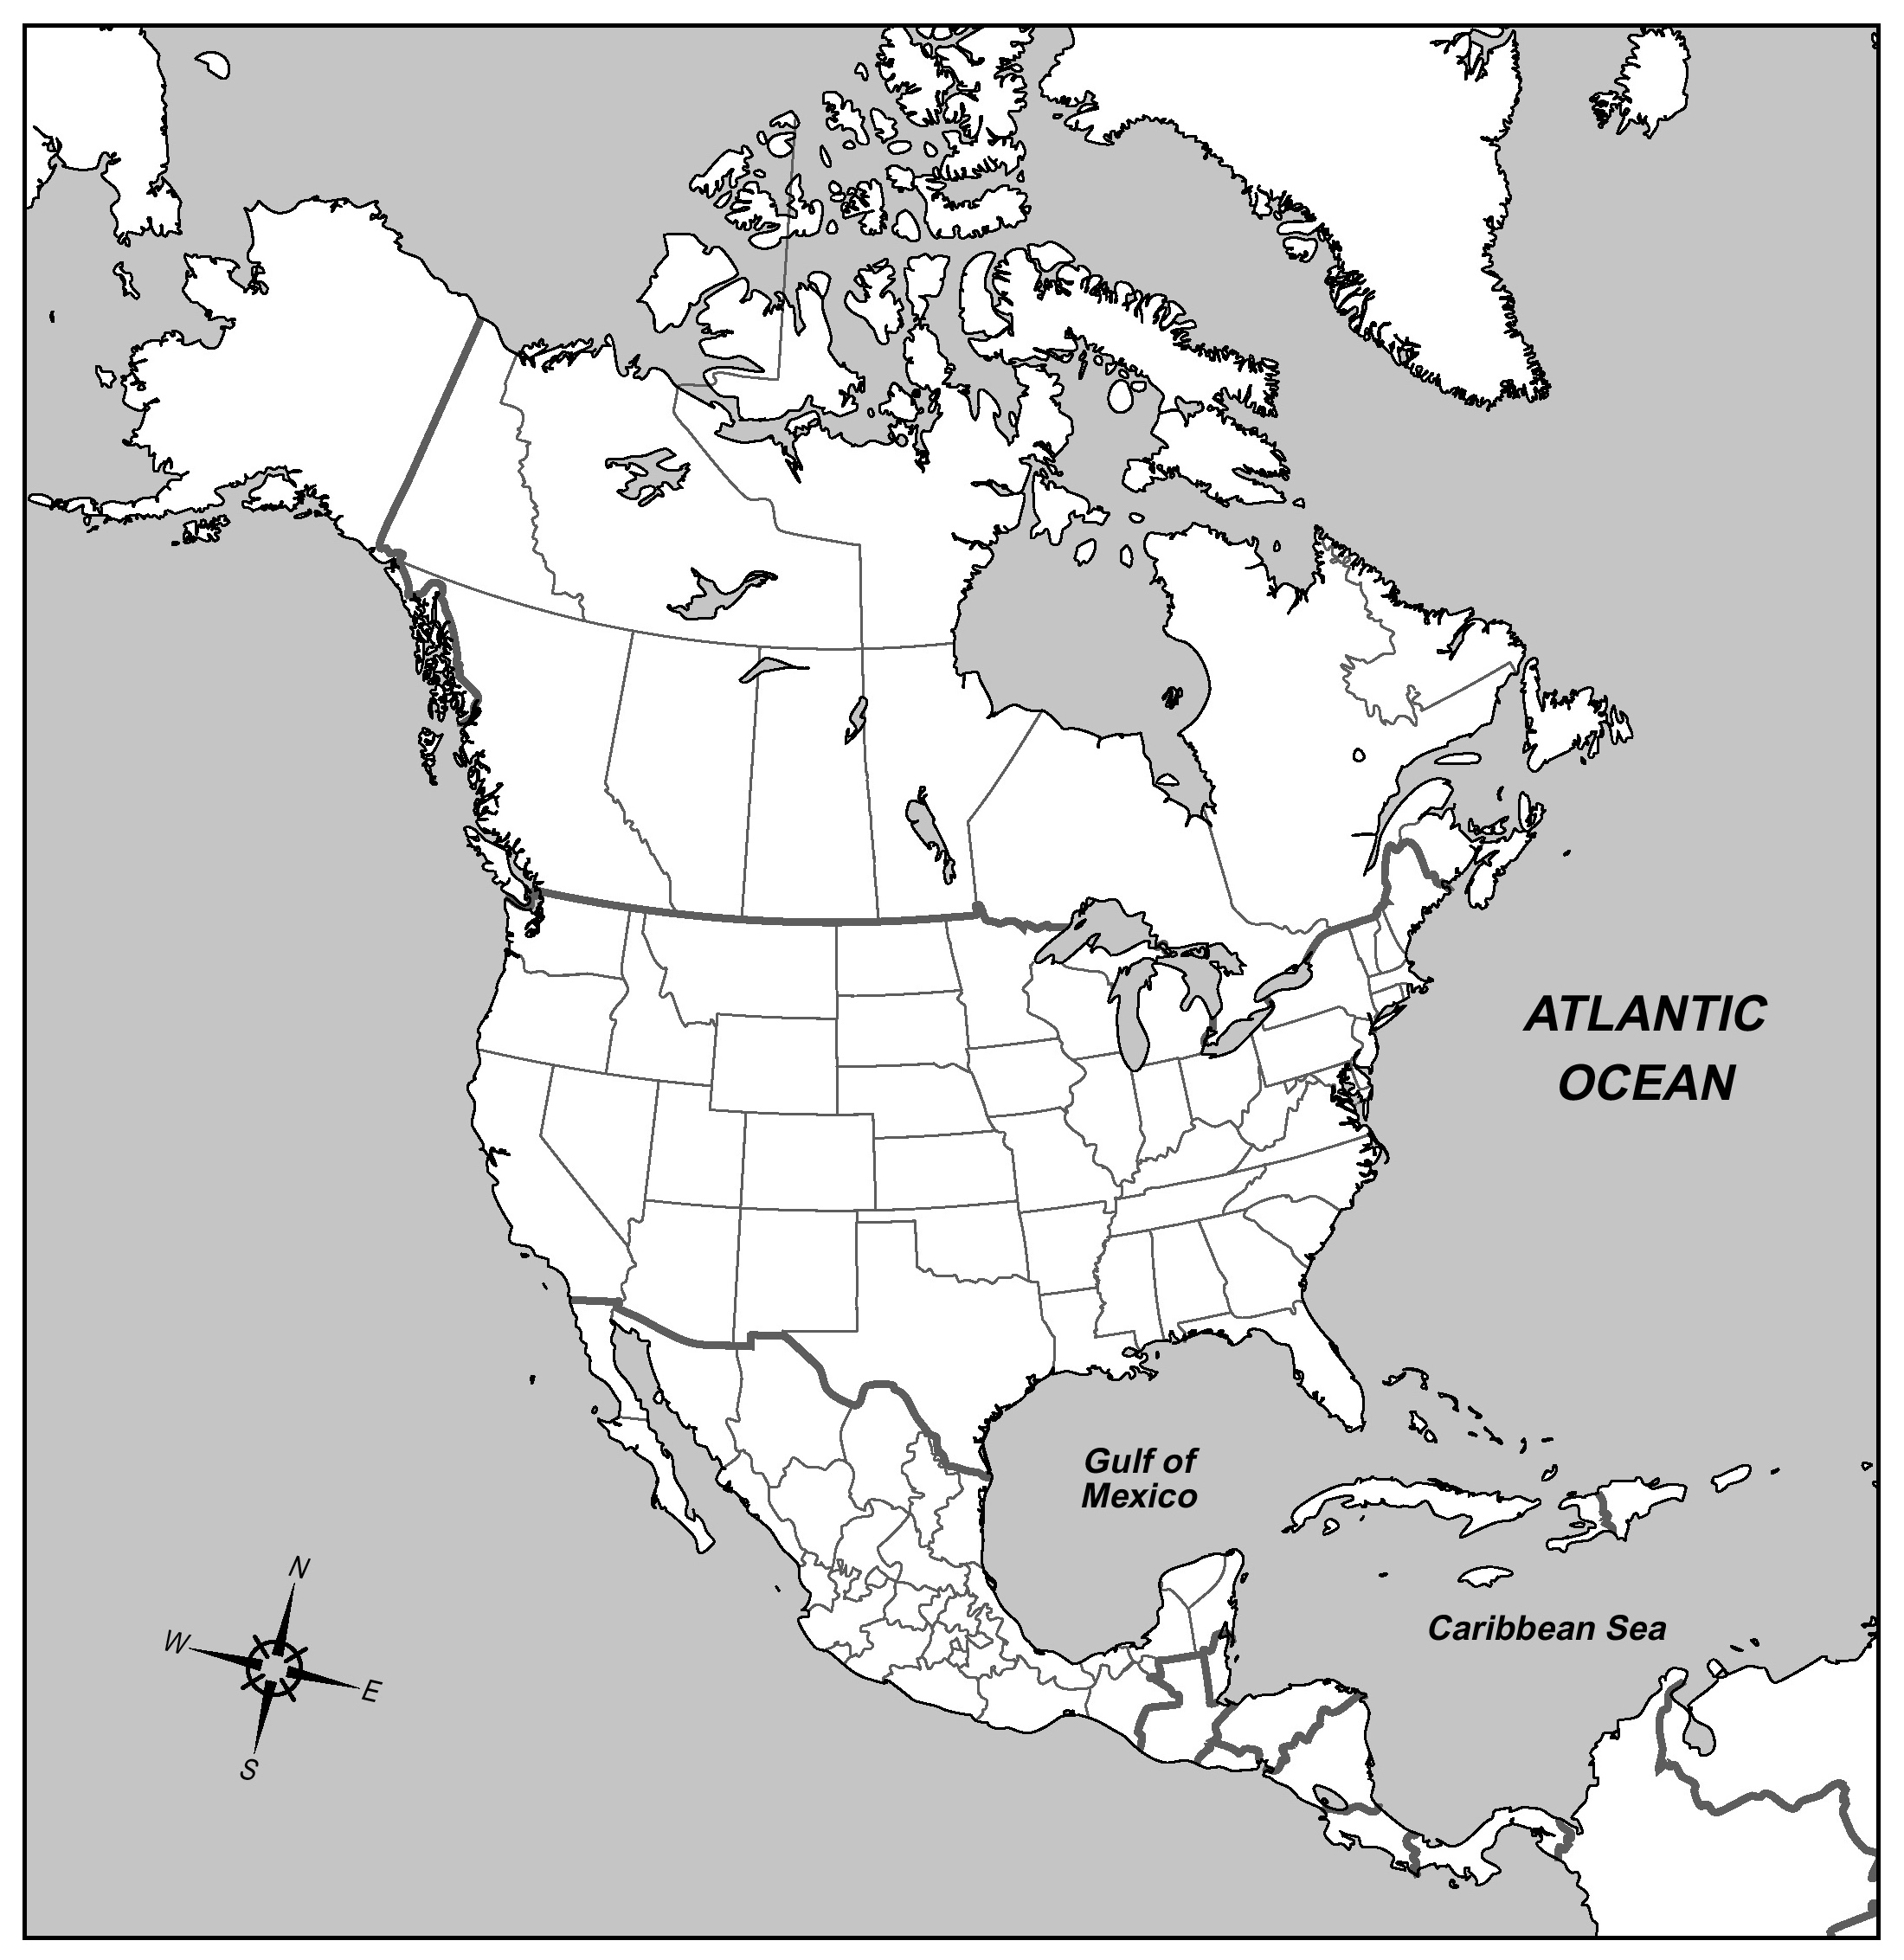 political map of north america black and white Large Contour Political Map Of North America North America political map of north america black and white